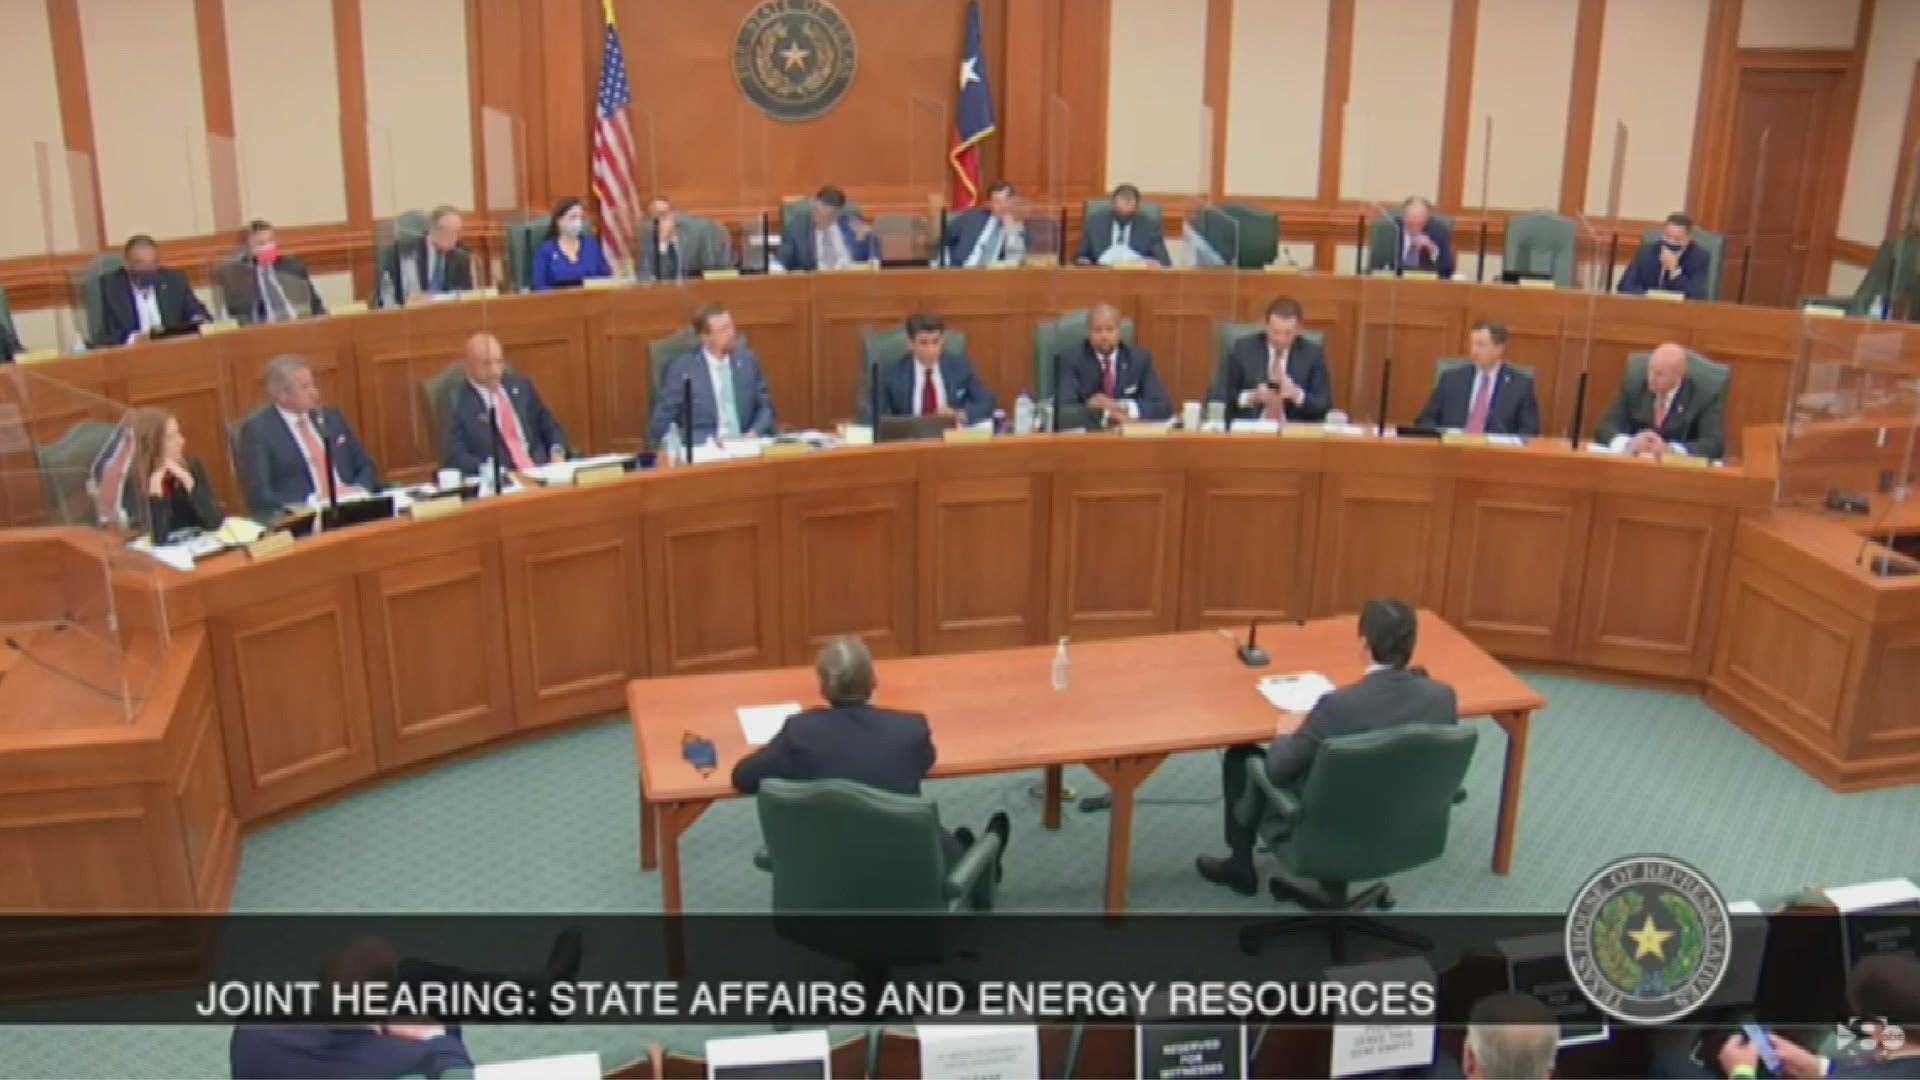 The Texas House Committees on State Affairs and Energy Resources will hold a joint hearing at 9 a.m. to discuss the factors that led to statewide outages last week.